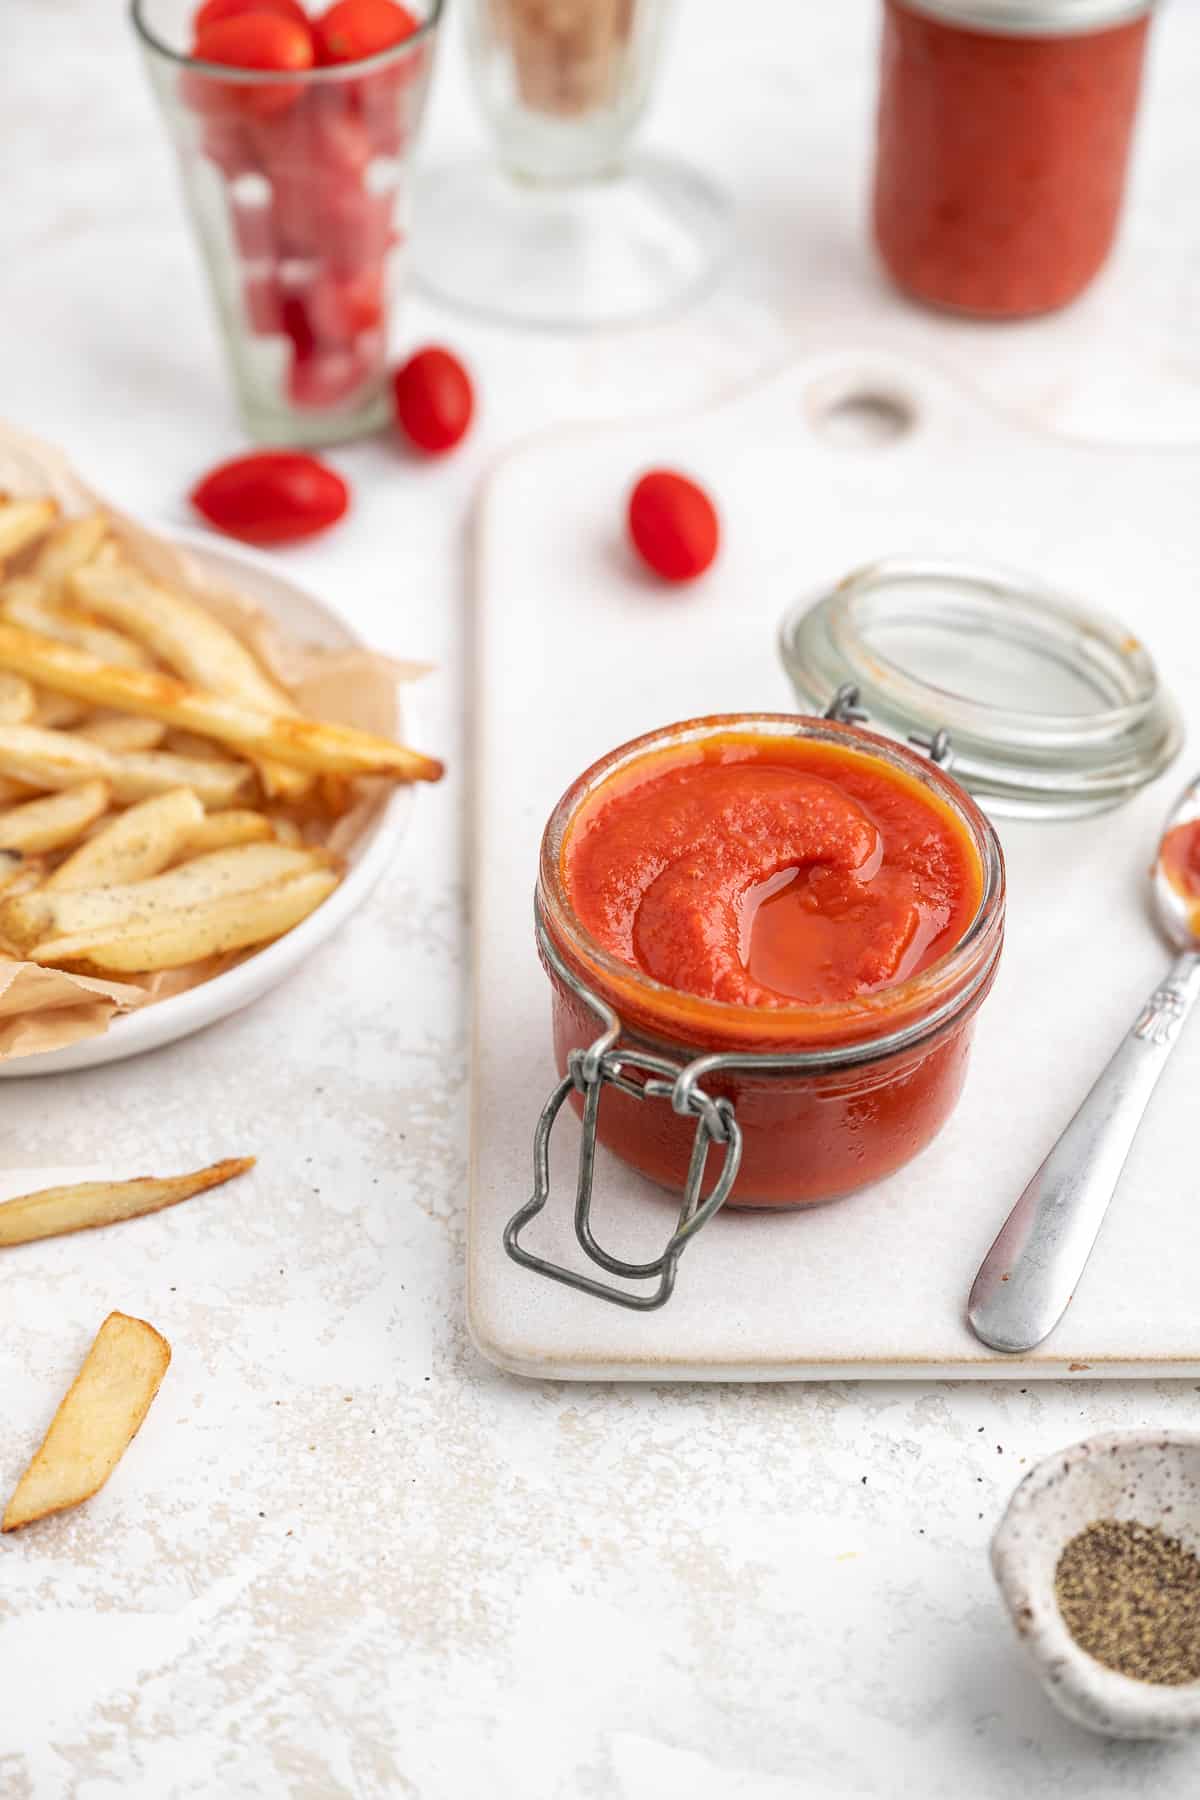 homemade ketchup in a sealable container